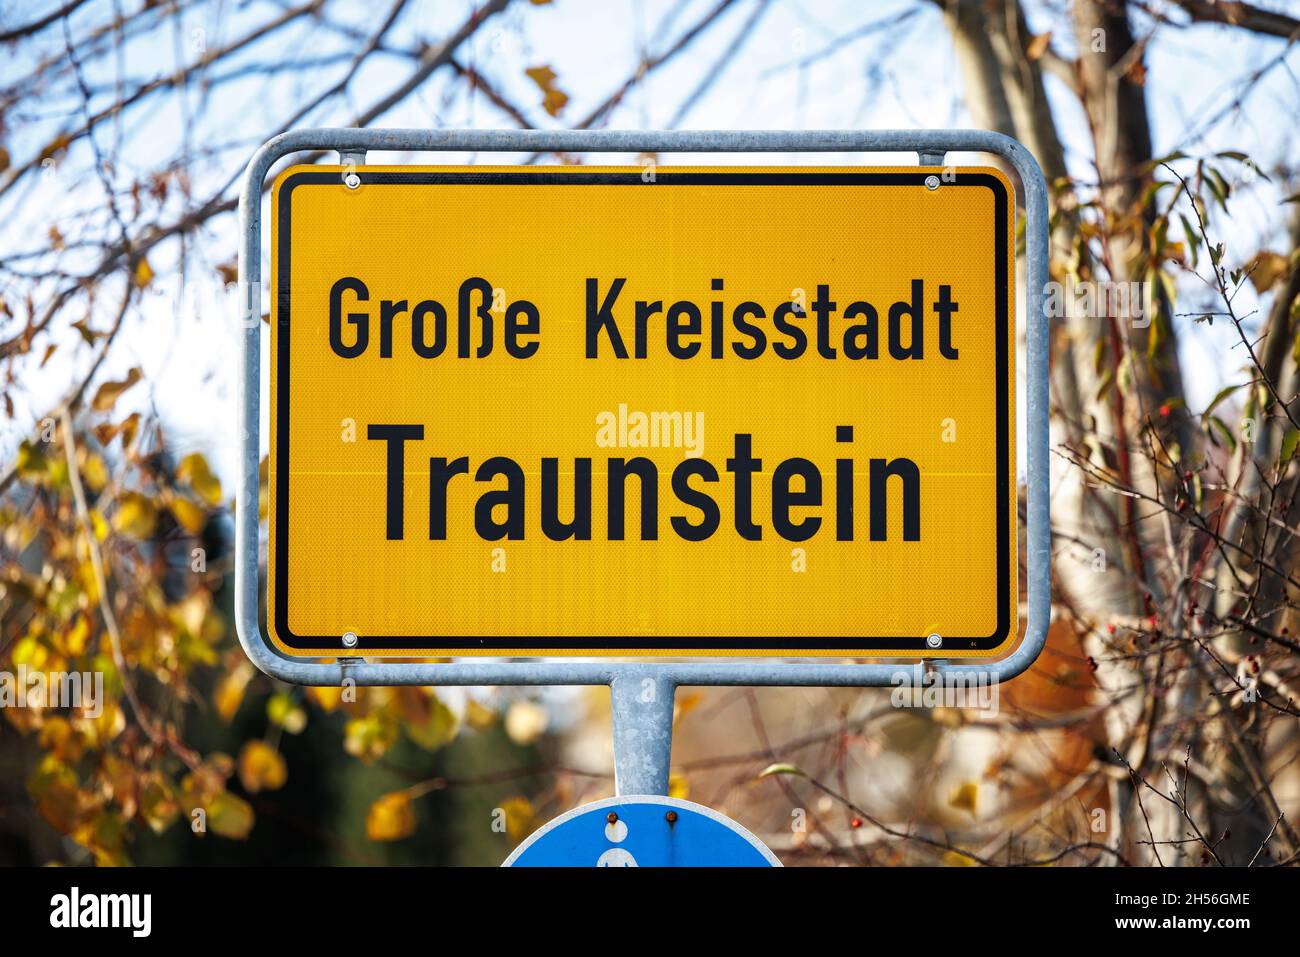 07 November 2021, Bavaria, Traunstein: The town sign of Traunstein with the inscription 'Große Kreisstadt Traunstein' can be seen at the entrance to a town. The district of Traunstein is currently one of the Bavarian regions most affected by Corona. Photo: Matthias Balk/dpa Stock Photo